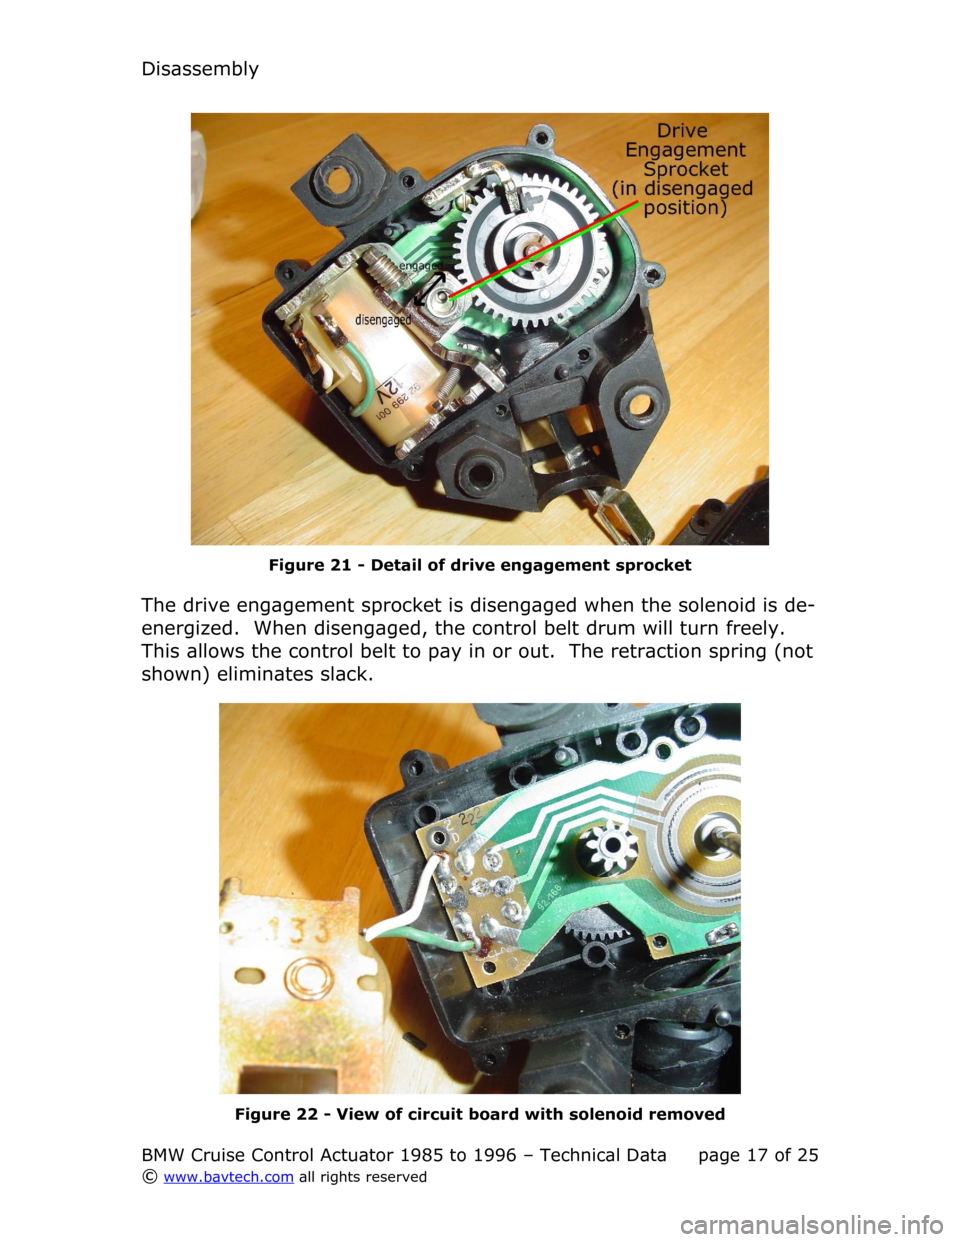 BMW 7 SERIES 1989 E32 Cruise Control Acutator Disassembly
Figure  21  - Detail of drive engagement sprocket
The drive engagement sprocket is disengaged when the solenoid is de-
energized.  When disengaged, the control belt drum will turn freely. 